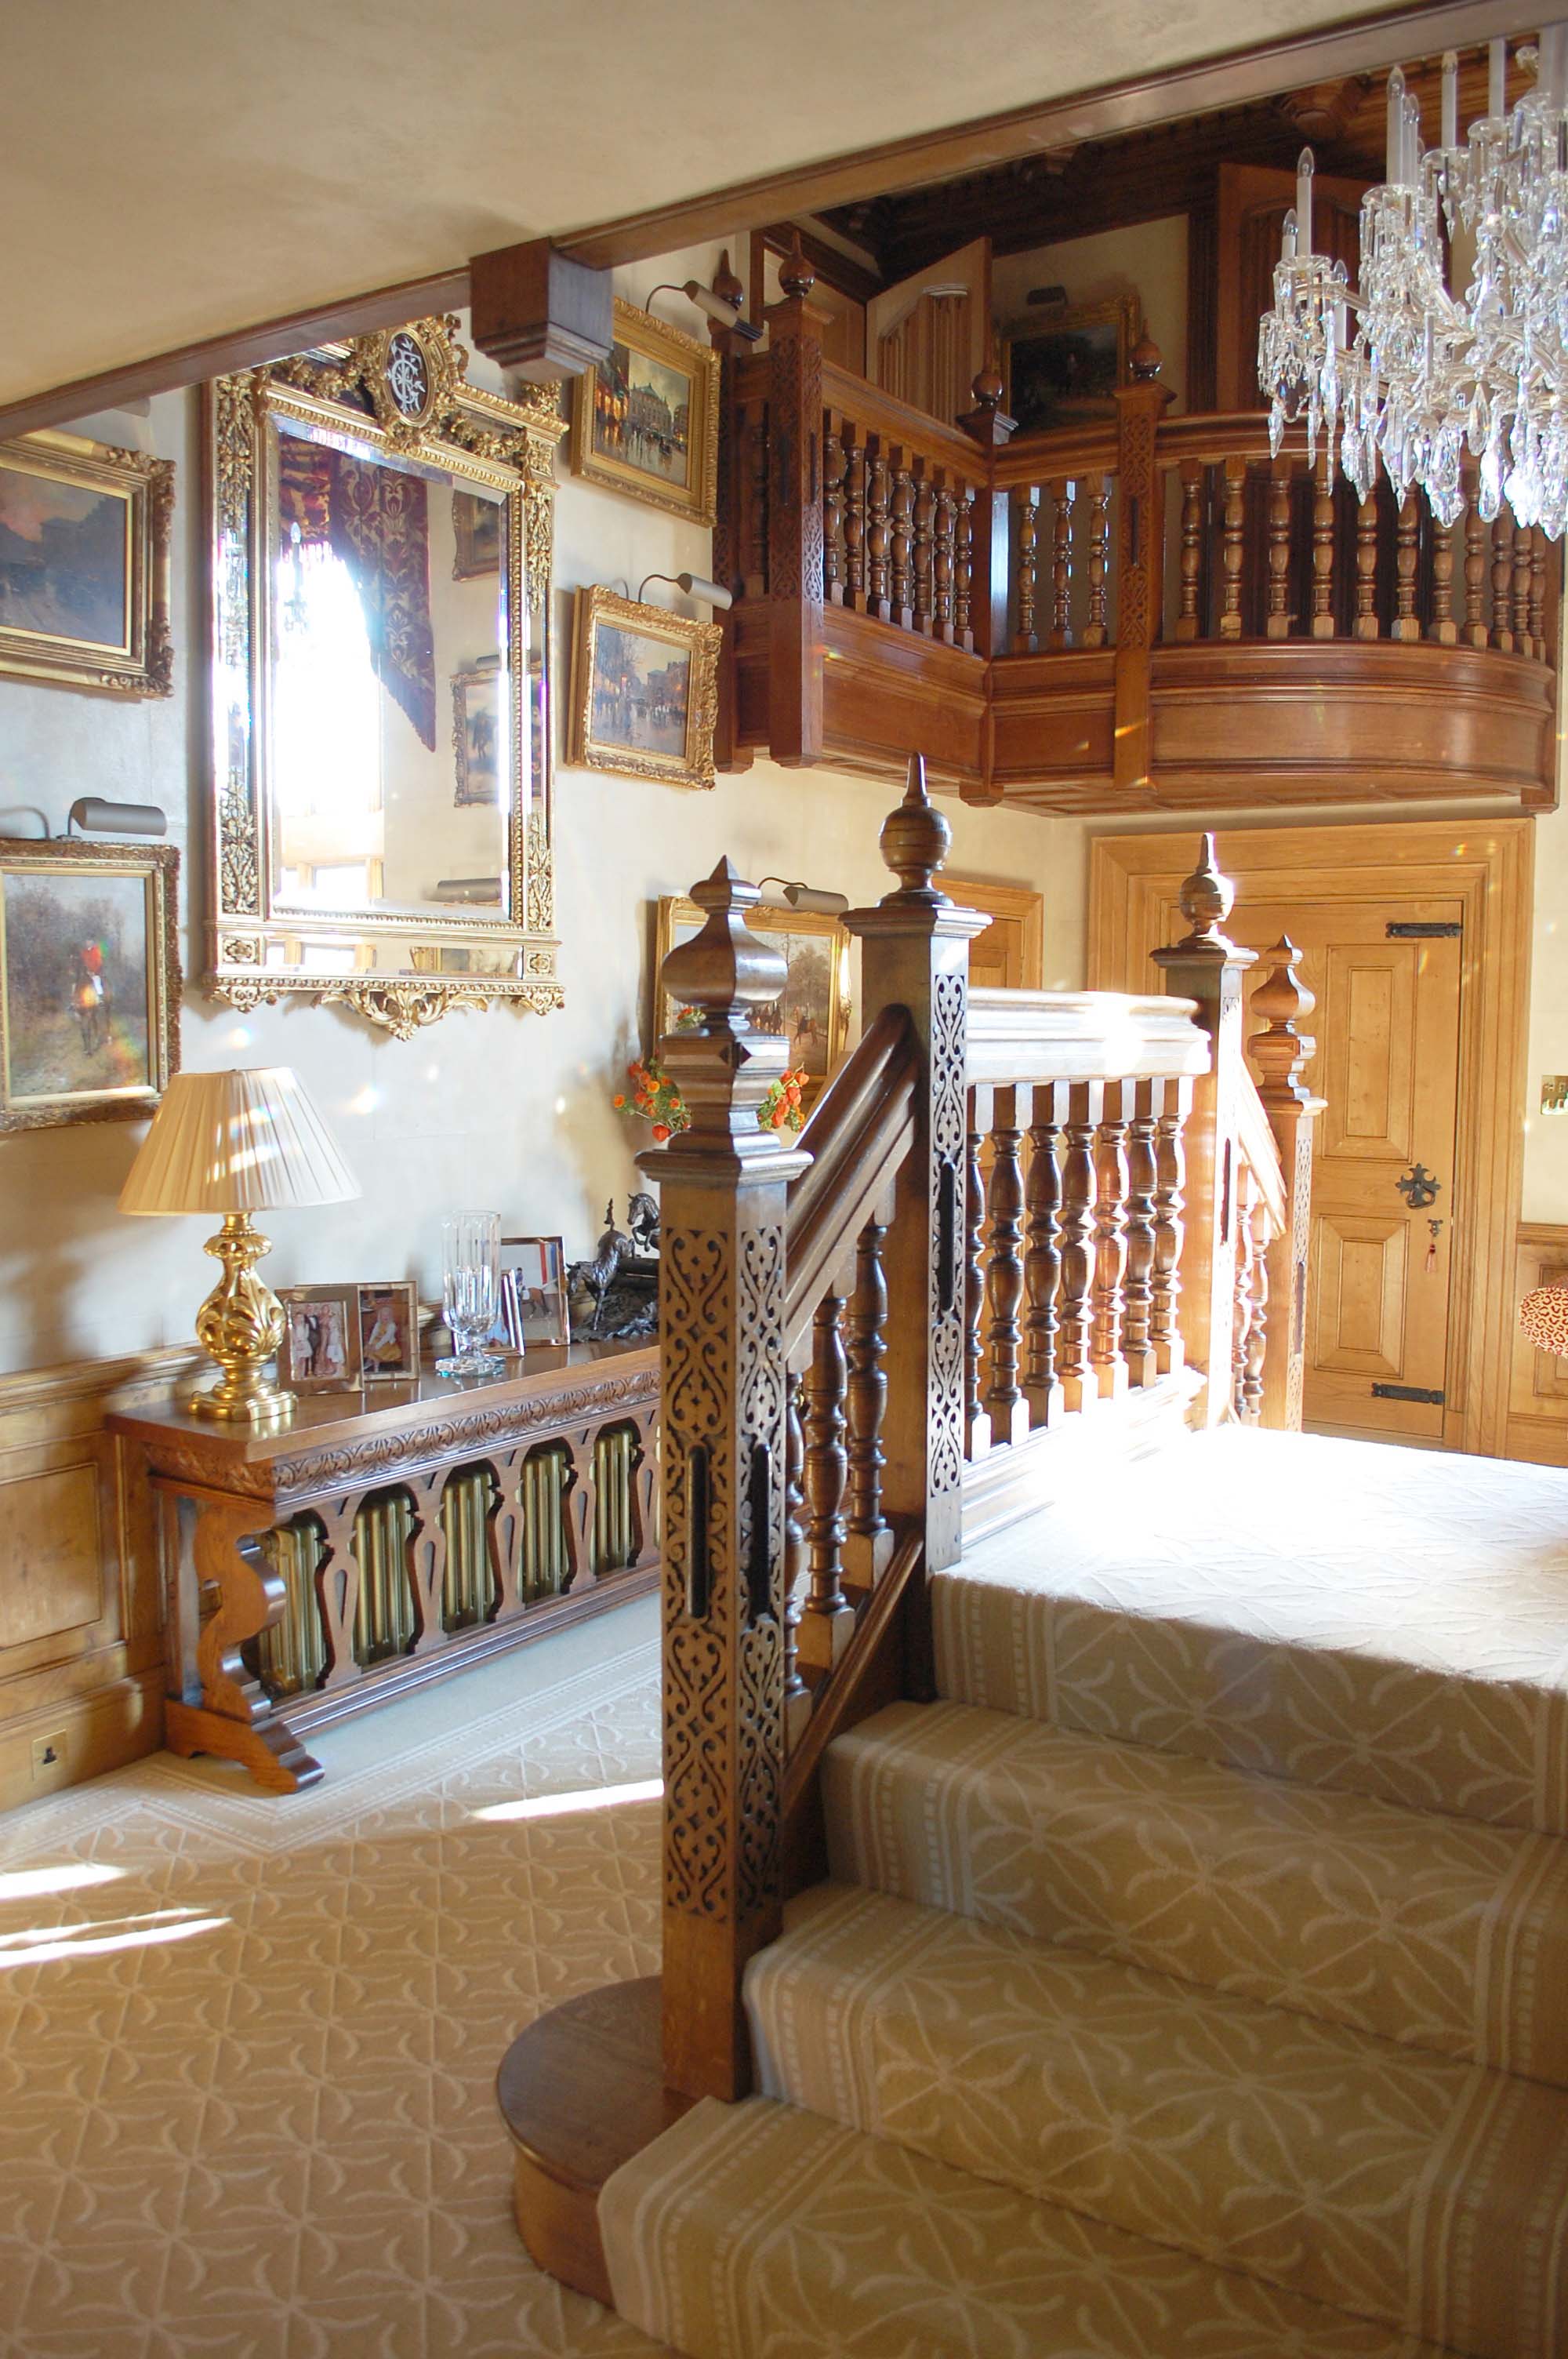 16th and 17th century Gothic and Tudor style period staircases and balsutrading hand carved newel posts and finials